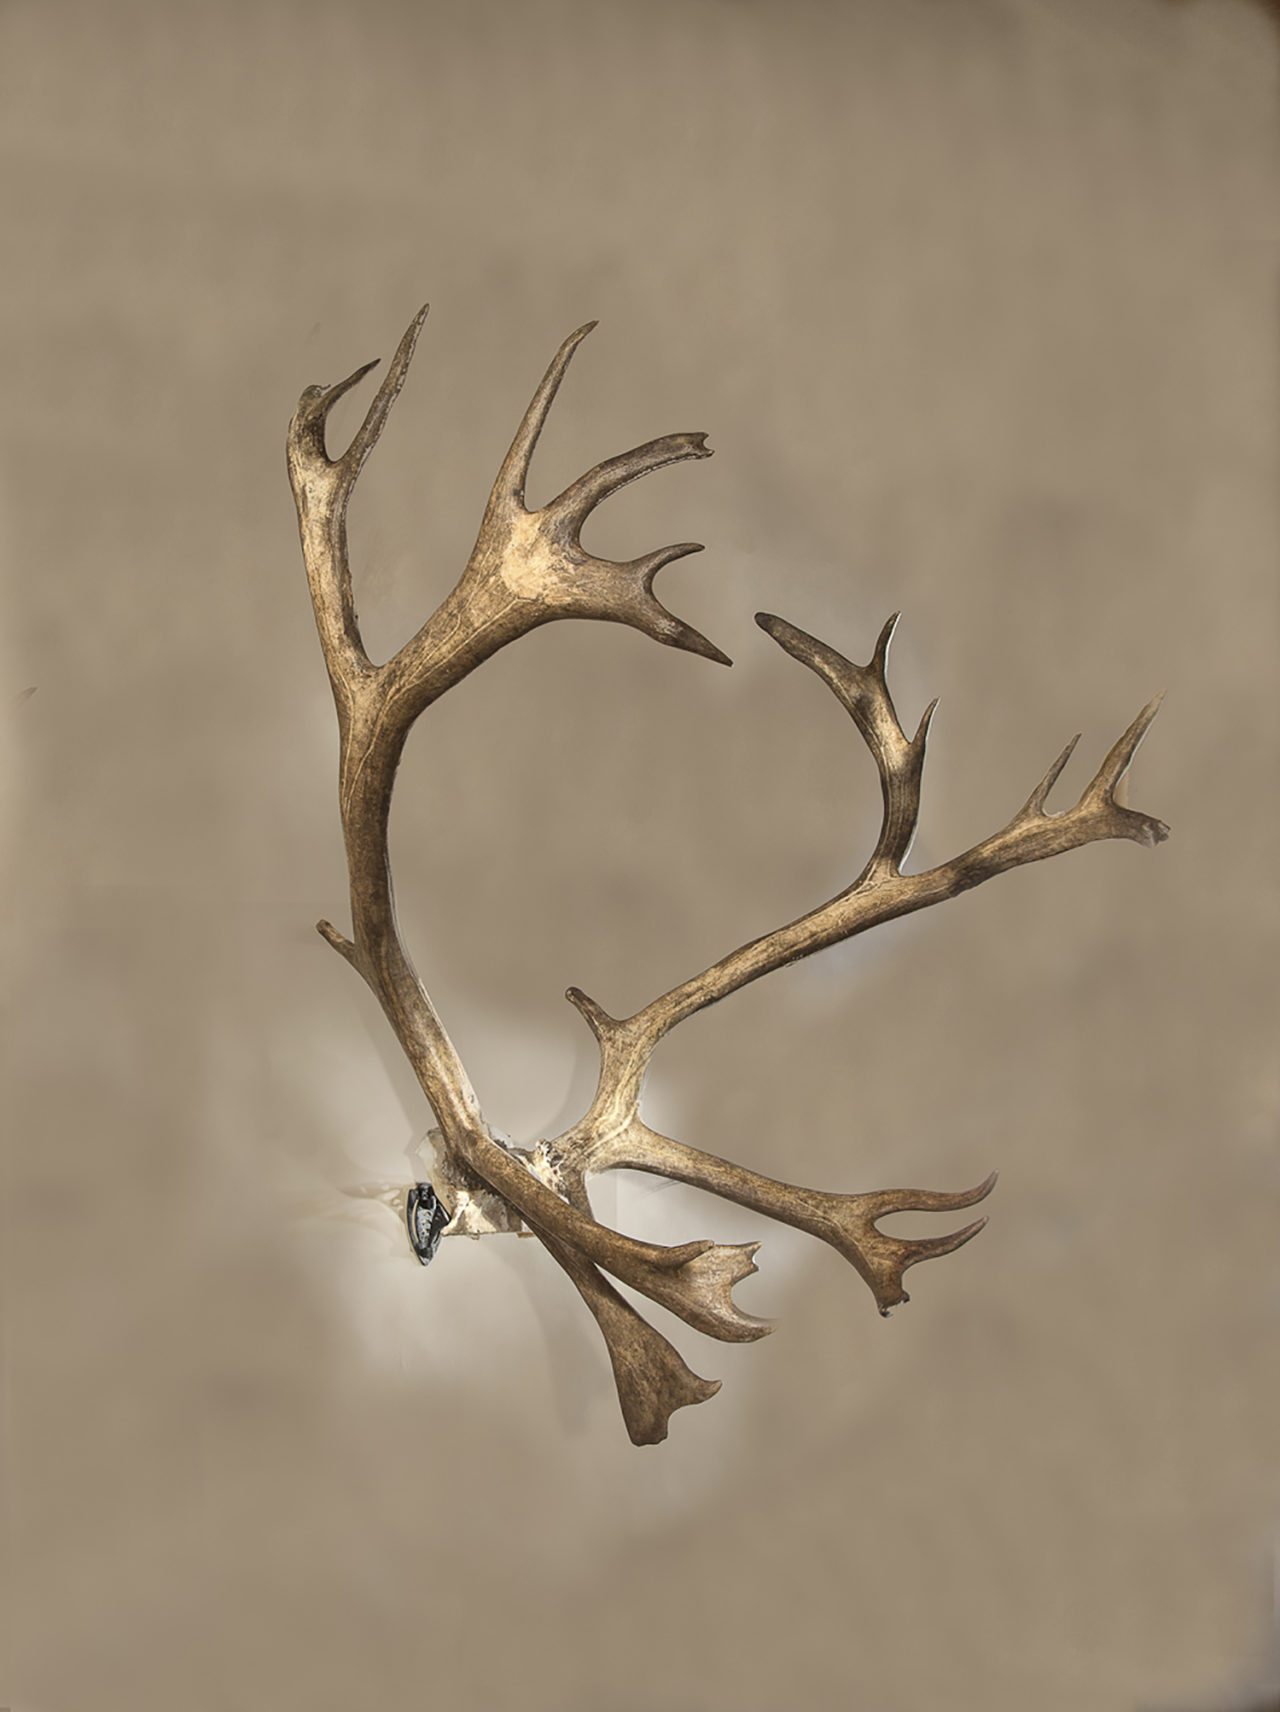 WHEN YOU WANT TO DISPLAY LARGER GAME ANTLERS OR HORNS IN STYLE LOOK TO THE SKULL HOOKER® XXL BONE BRACKET